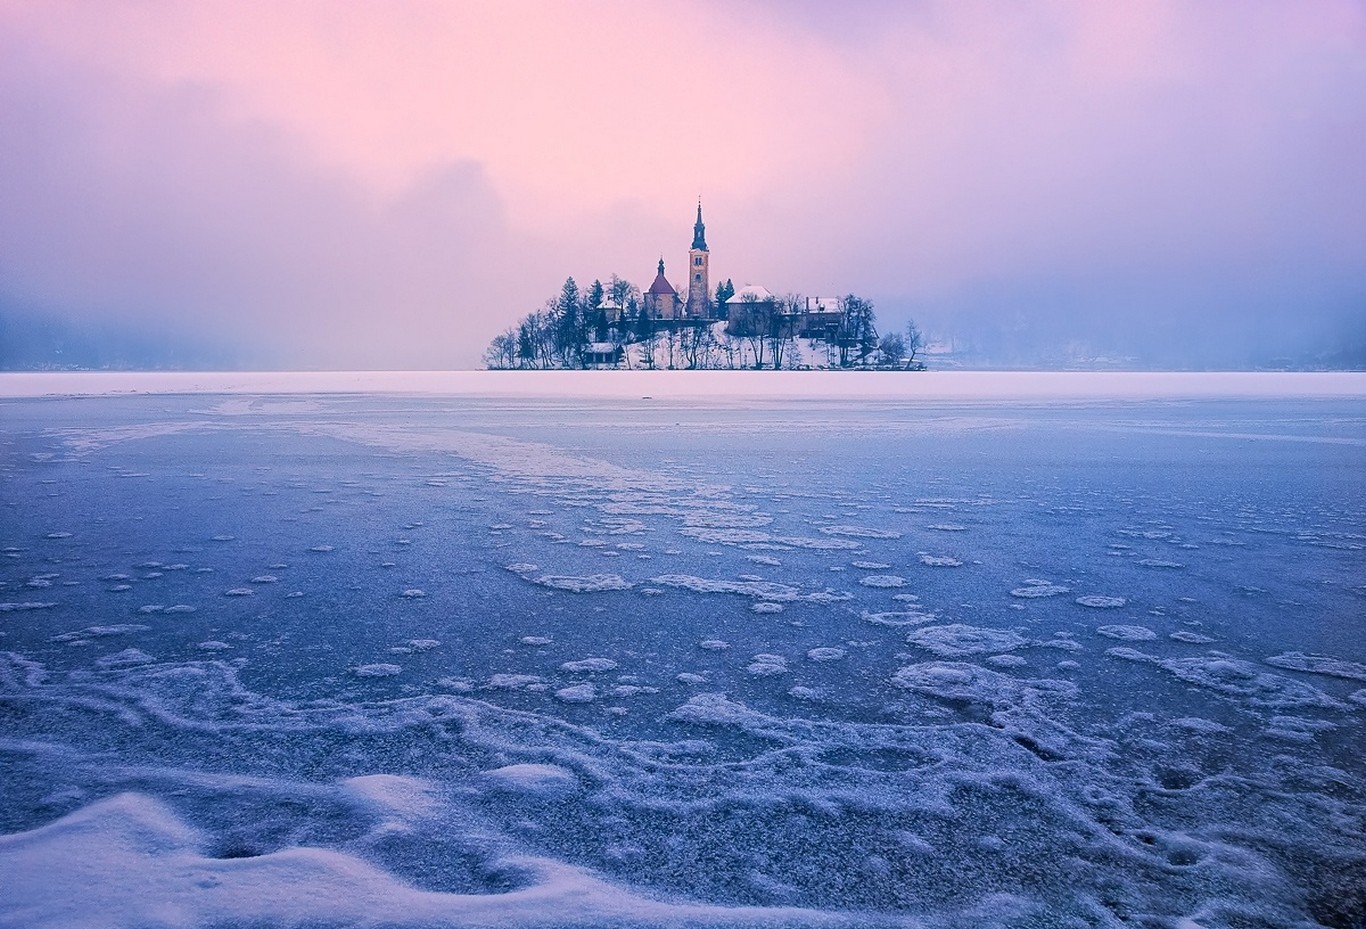 General 1366x929 lake island winter Lake Bled Slovenia church frost ice mist trees nature landscape cold outdoors